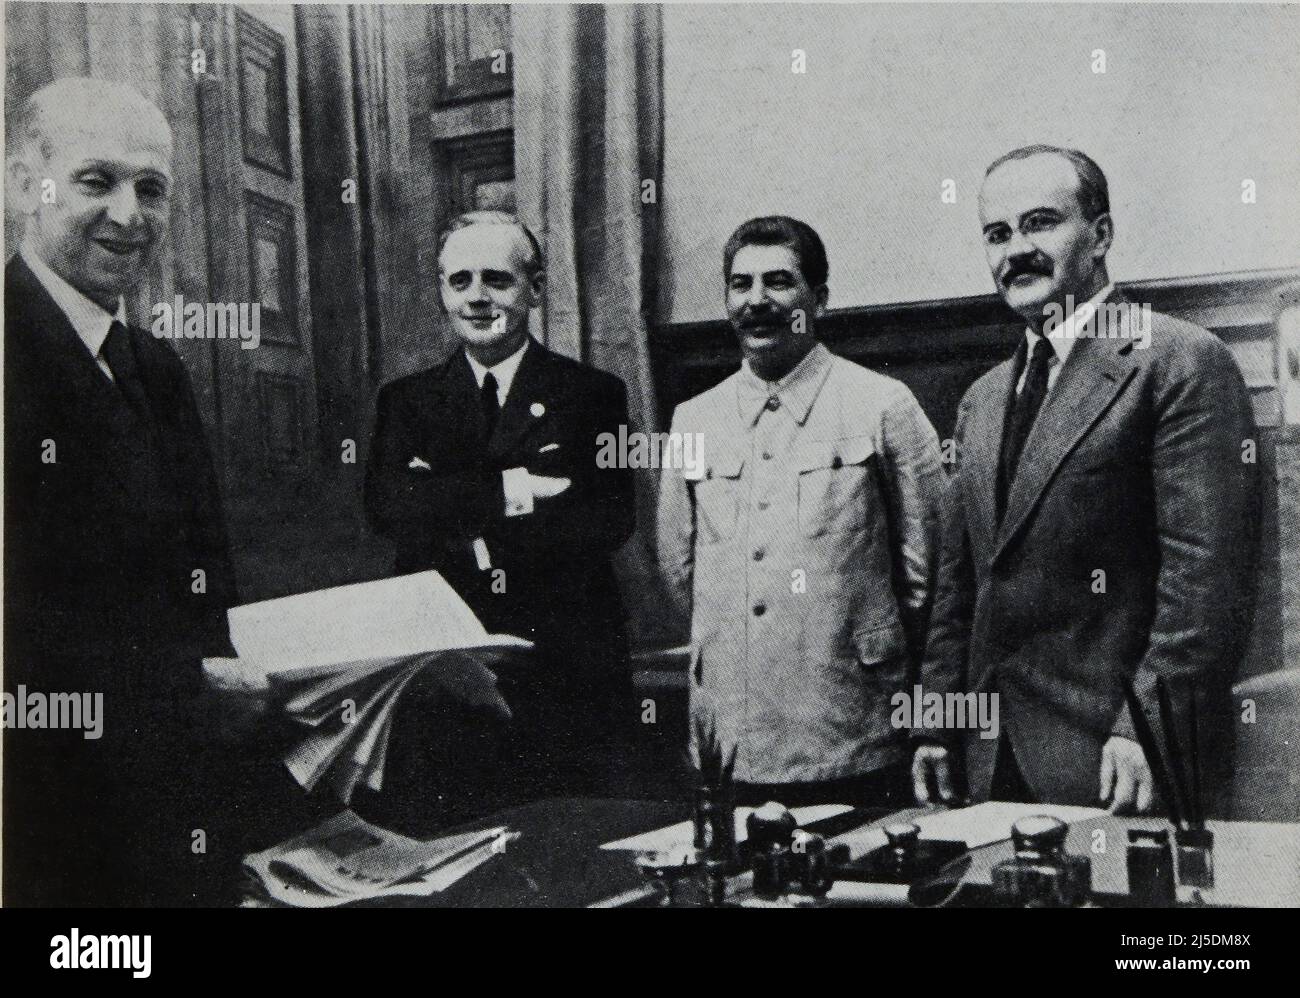 Eng translation : ' The signing of the German-Soviet non-aggression pact. From right to left: Messrs. Molotov, Stalin, von Ribbentrop and Gaus  ' - Original in french : ' La signature du pacte de non-agression germano-soviétique. De droite à gauche : MM. Molotov, Staline, von Ribbentrop et Gaus ' - Extract from 'L'Illustration Journal Universel' - French illustrated magazine - 1939 Stock Photo